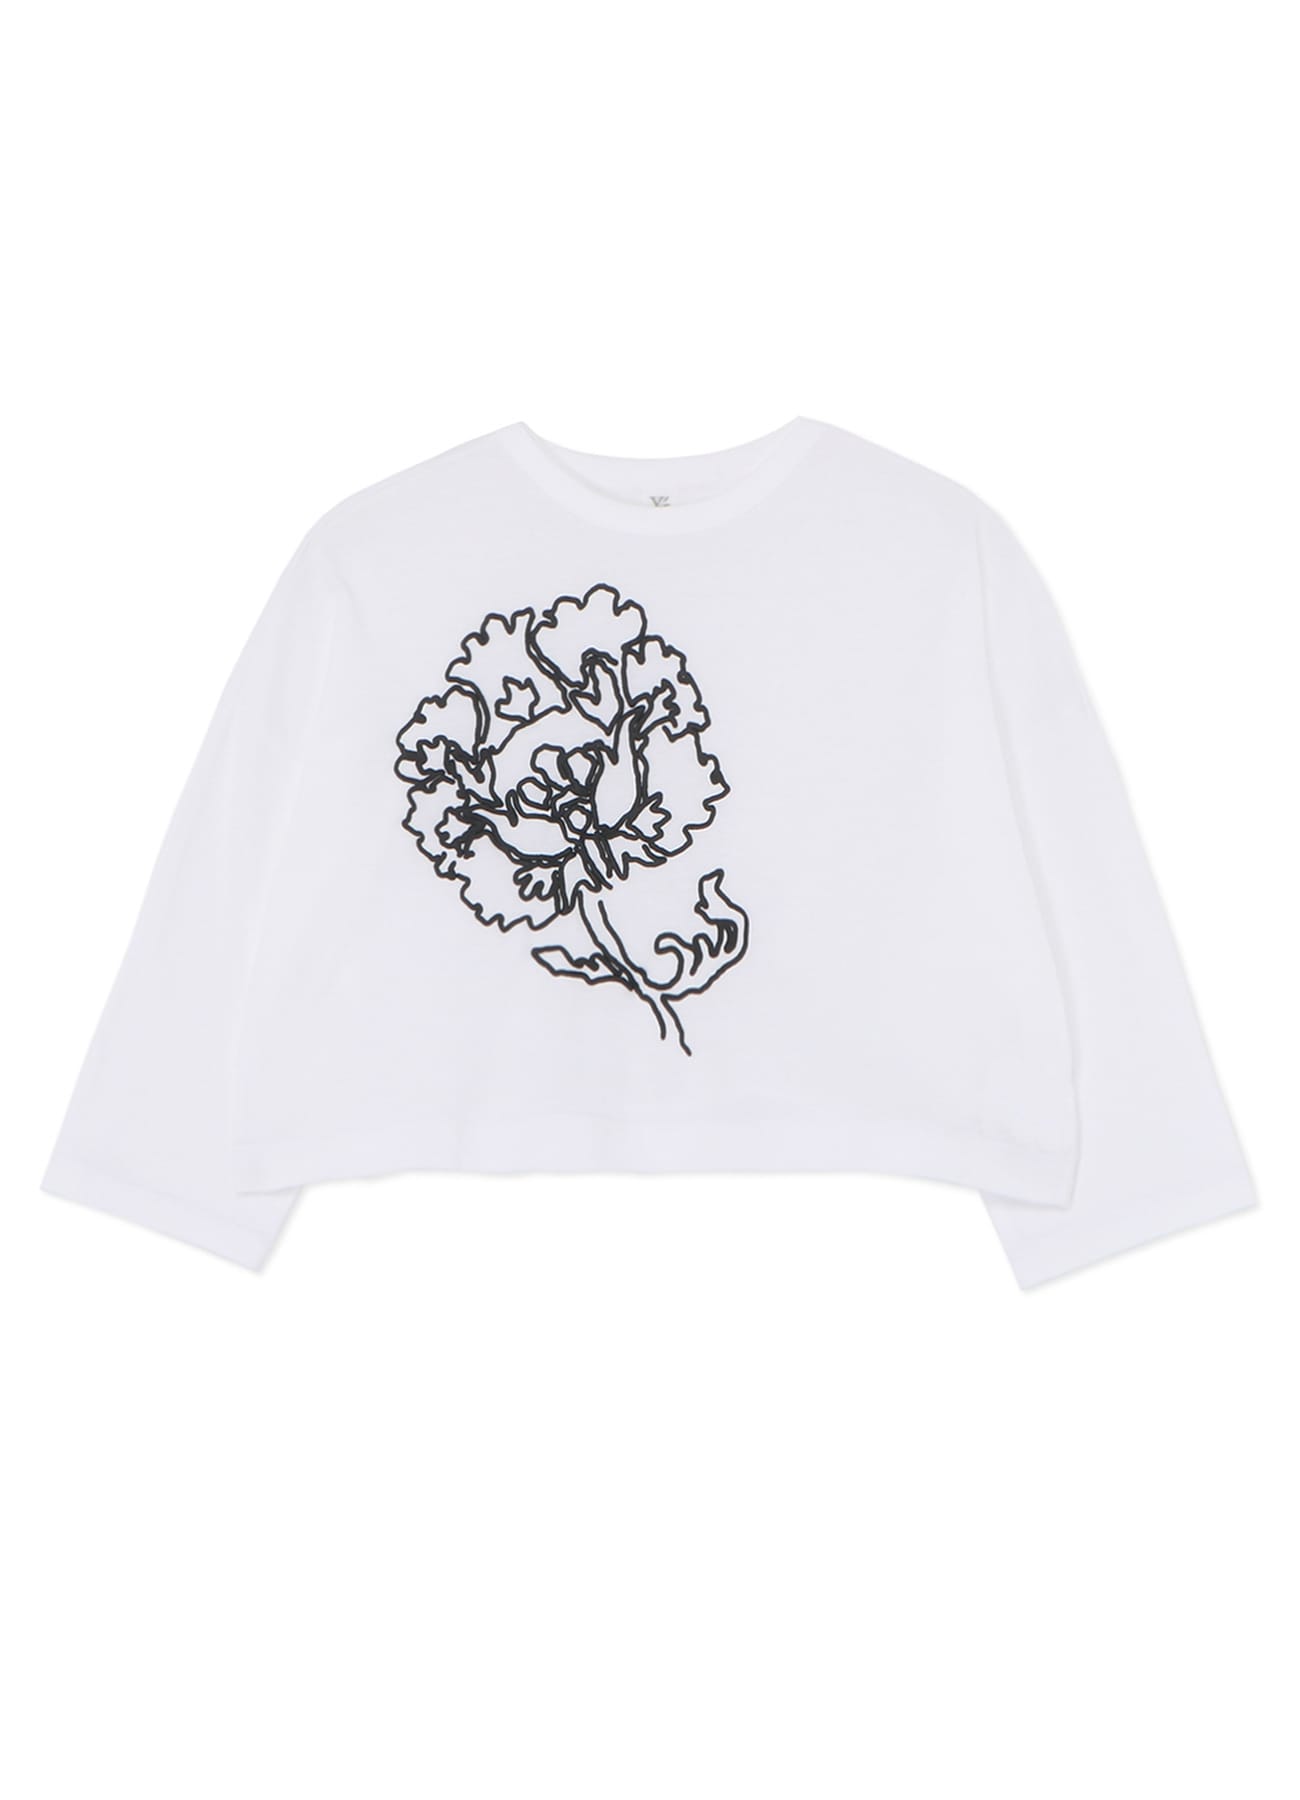 [Y’s KHADI COLLECTION]FLOWER PRINTED CROPPED T-SHIRT